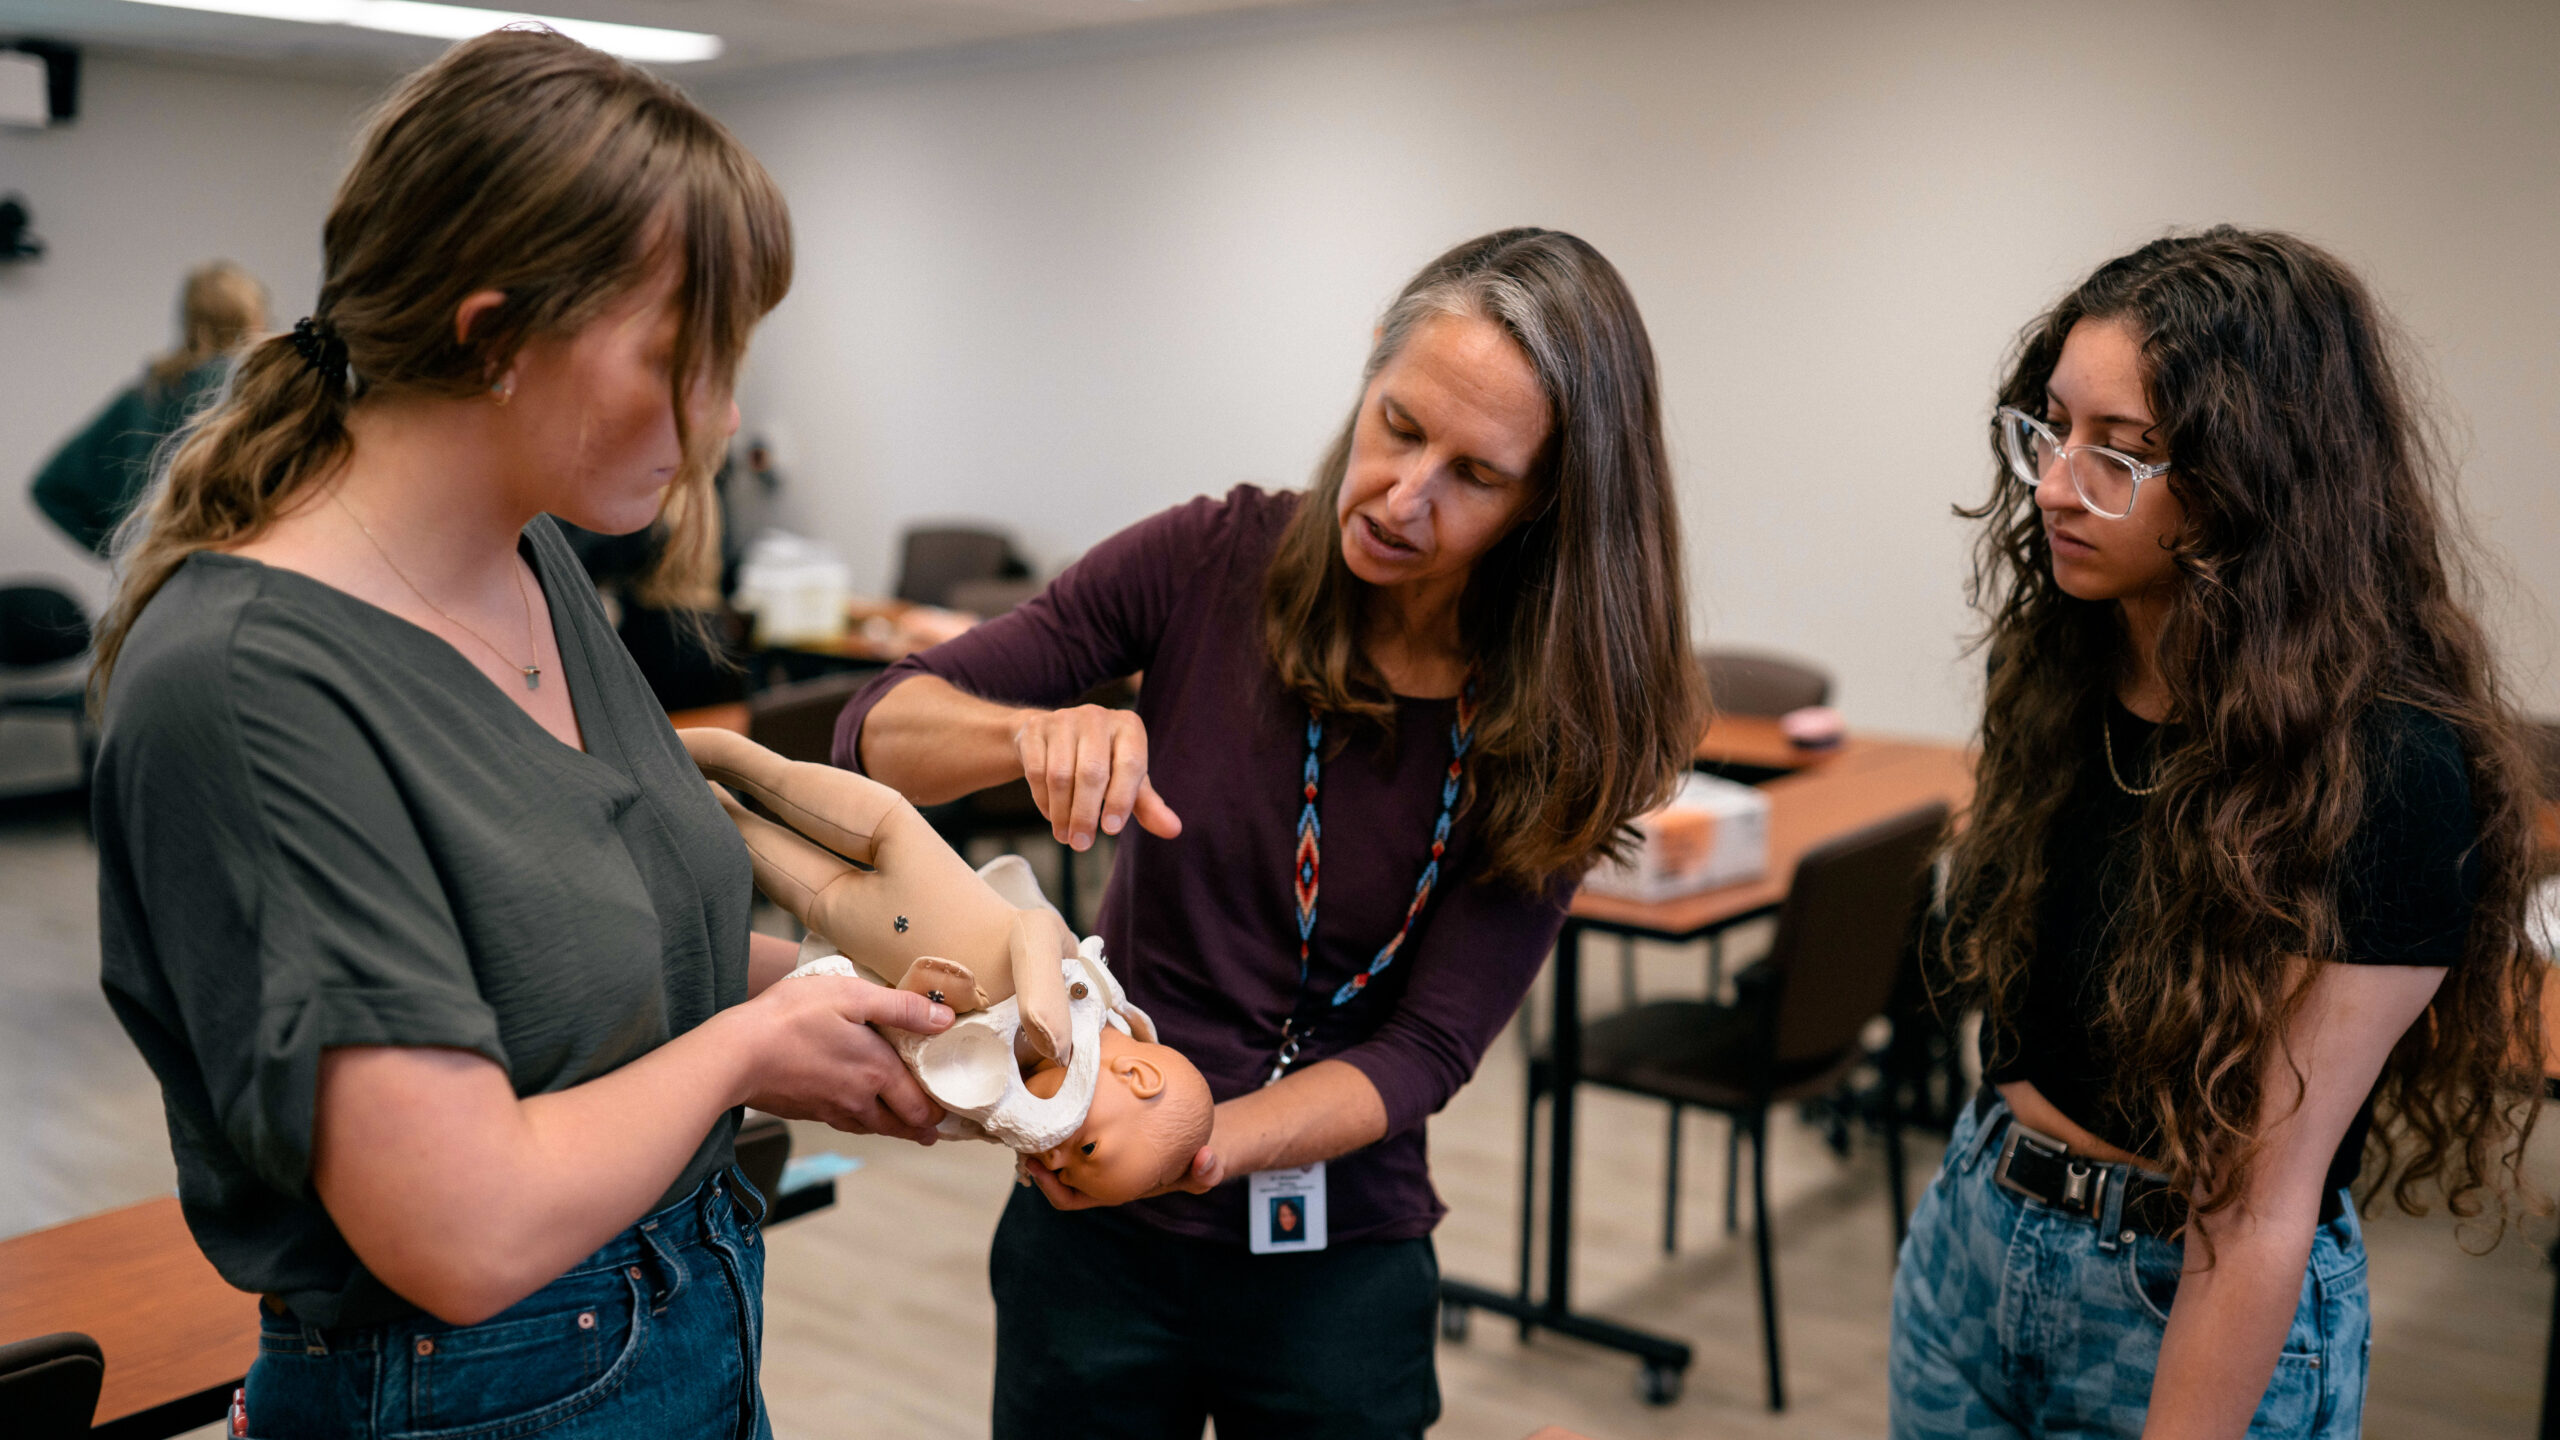 Liz Darling, director and assistant dean of midwifery at McMaster University, instructs students using a fetal doll.